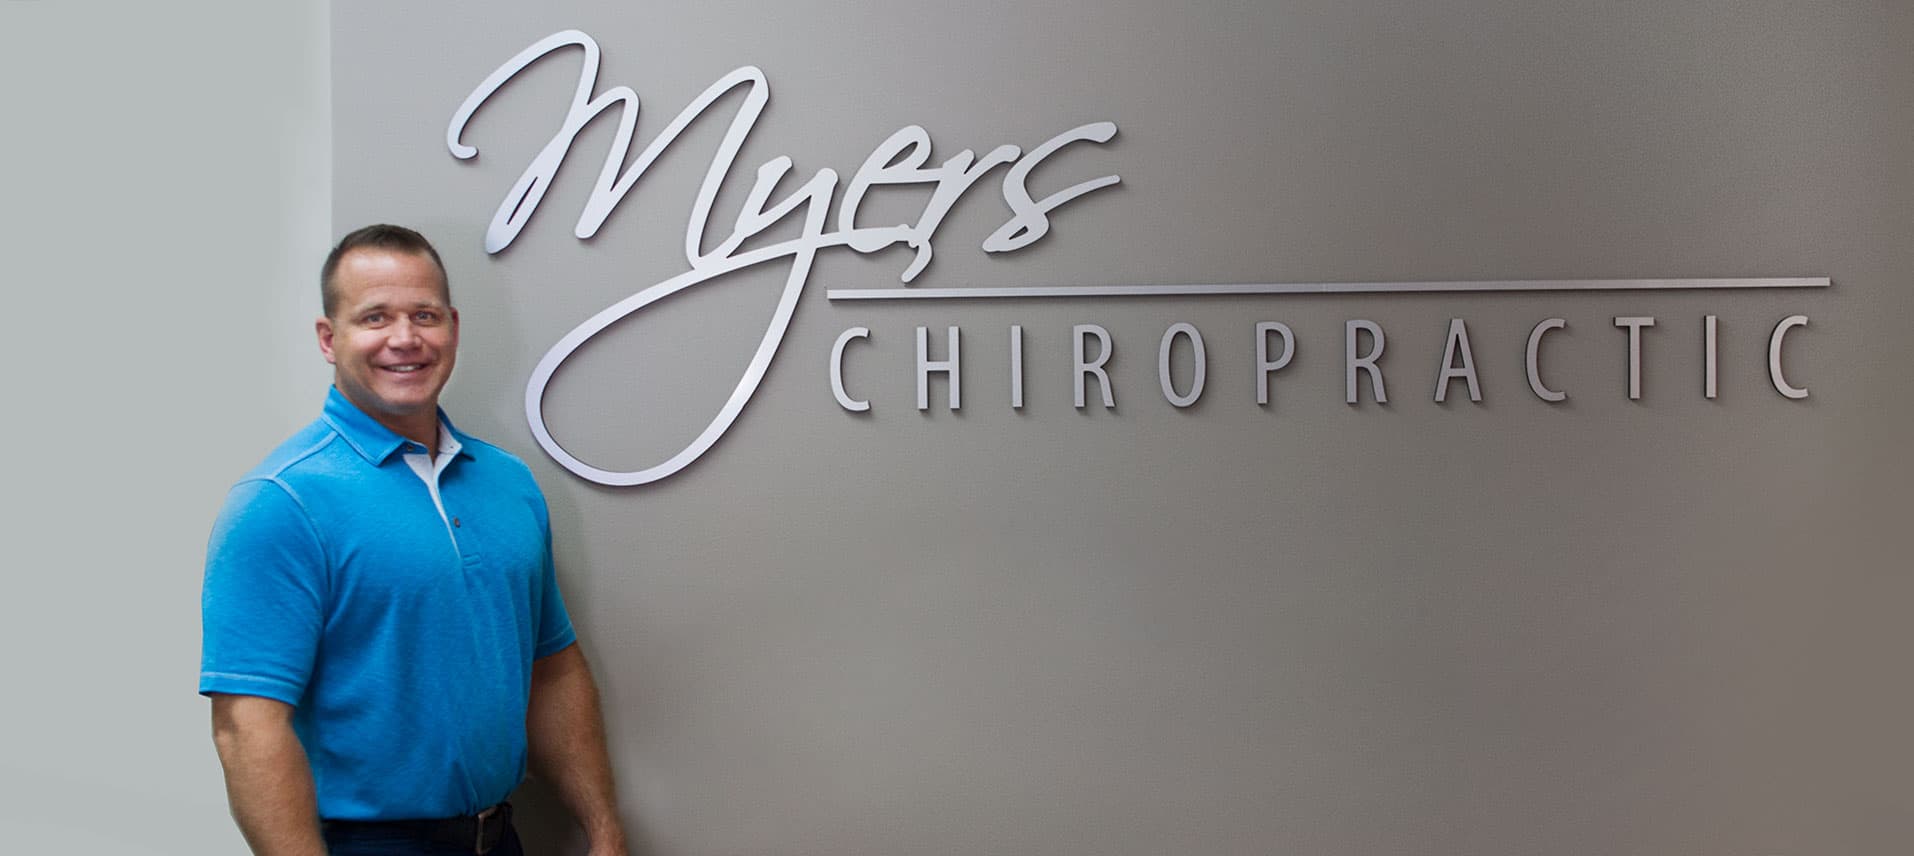 Chiropractor in Johnson City, TN | Myers Chiropractic - For Kids and Adults